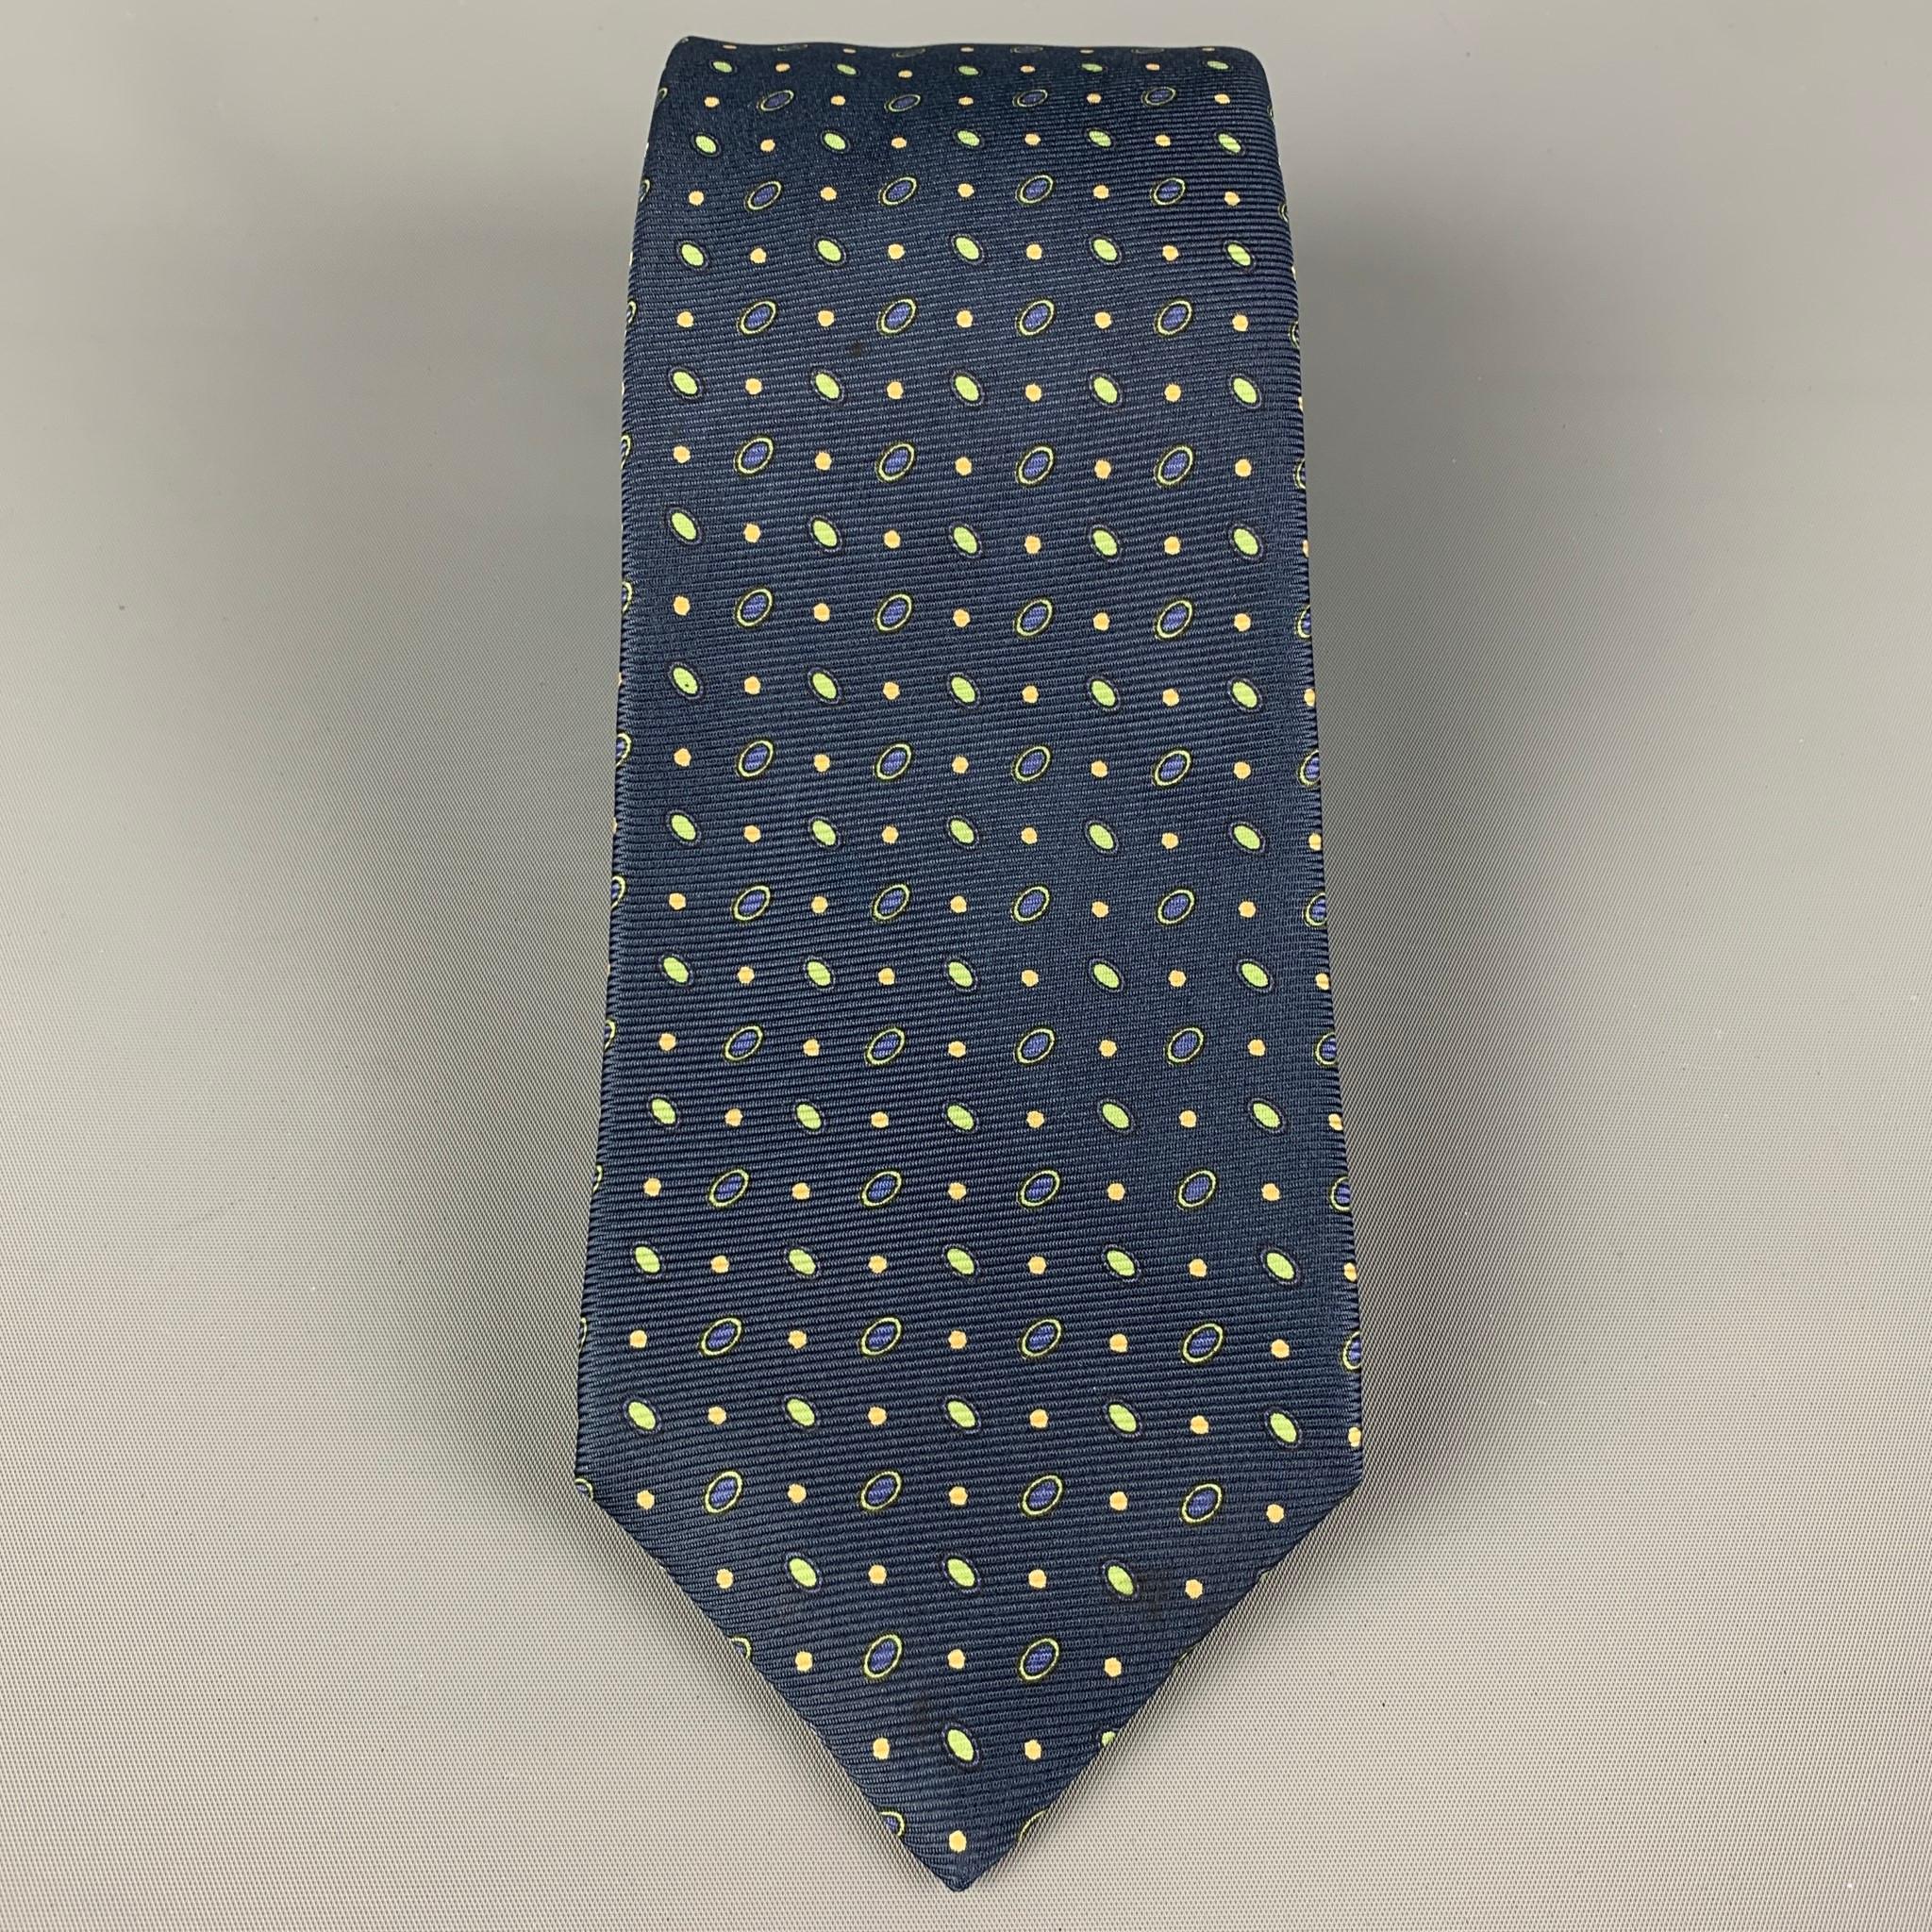 KITON necktie comes in a navy & green silk with a all over dot print. Made in Italy .

Very Good Pre-Owned Condition.

Width: 3.75 in.
Length: 62 in. 

 